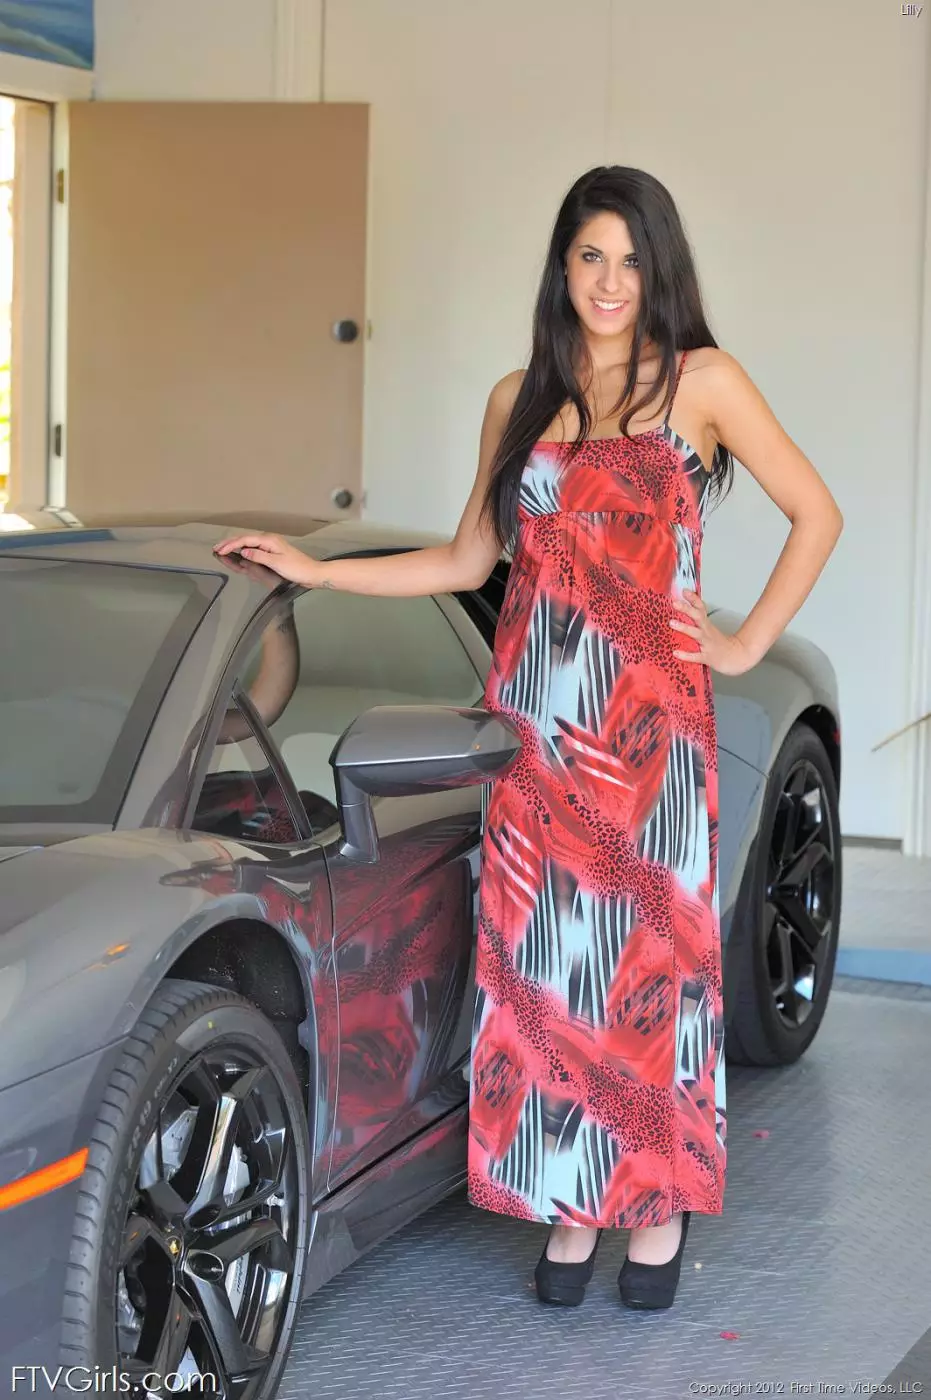 Teen brunette Lilly FTV in long dress flashes her tits and pussy as she poses by a car